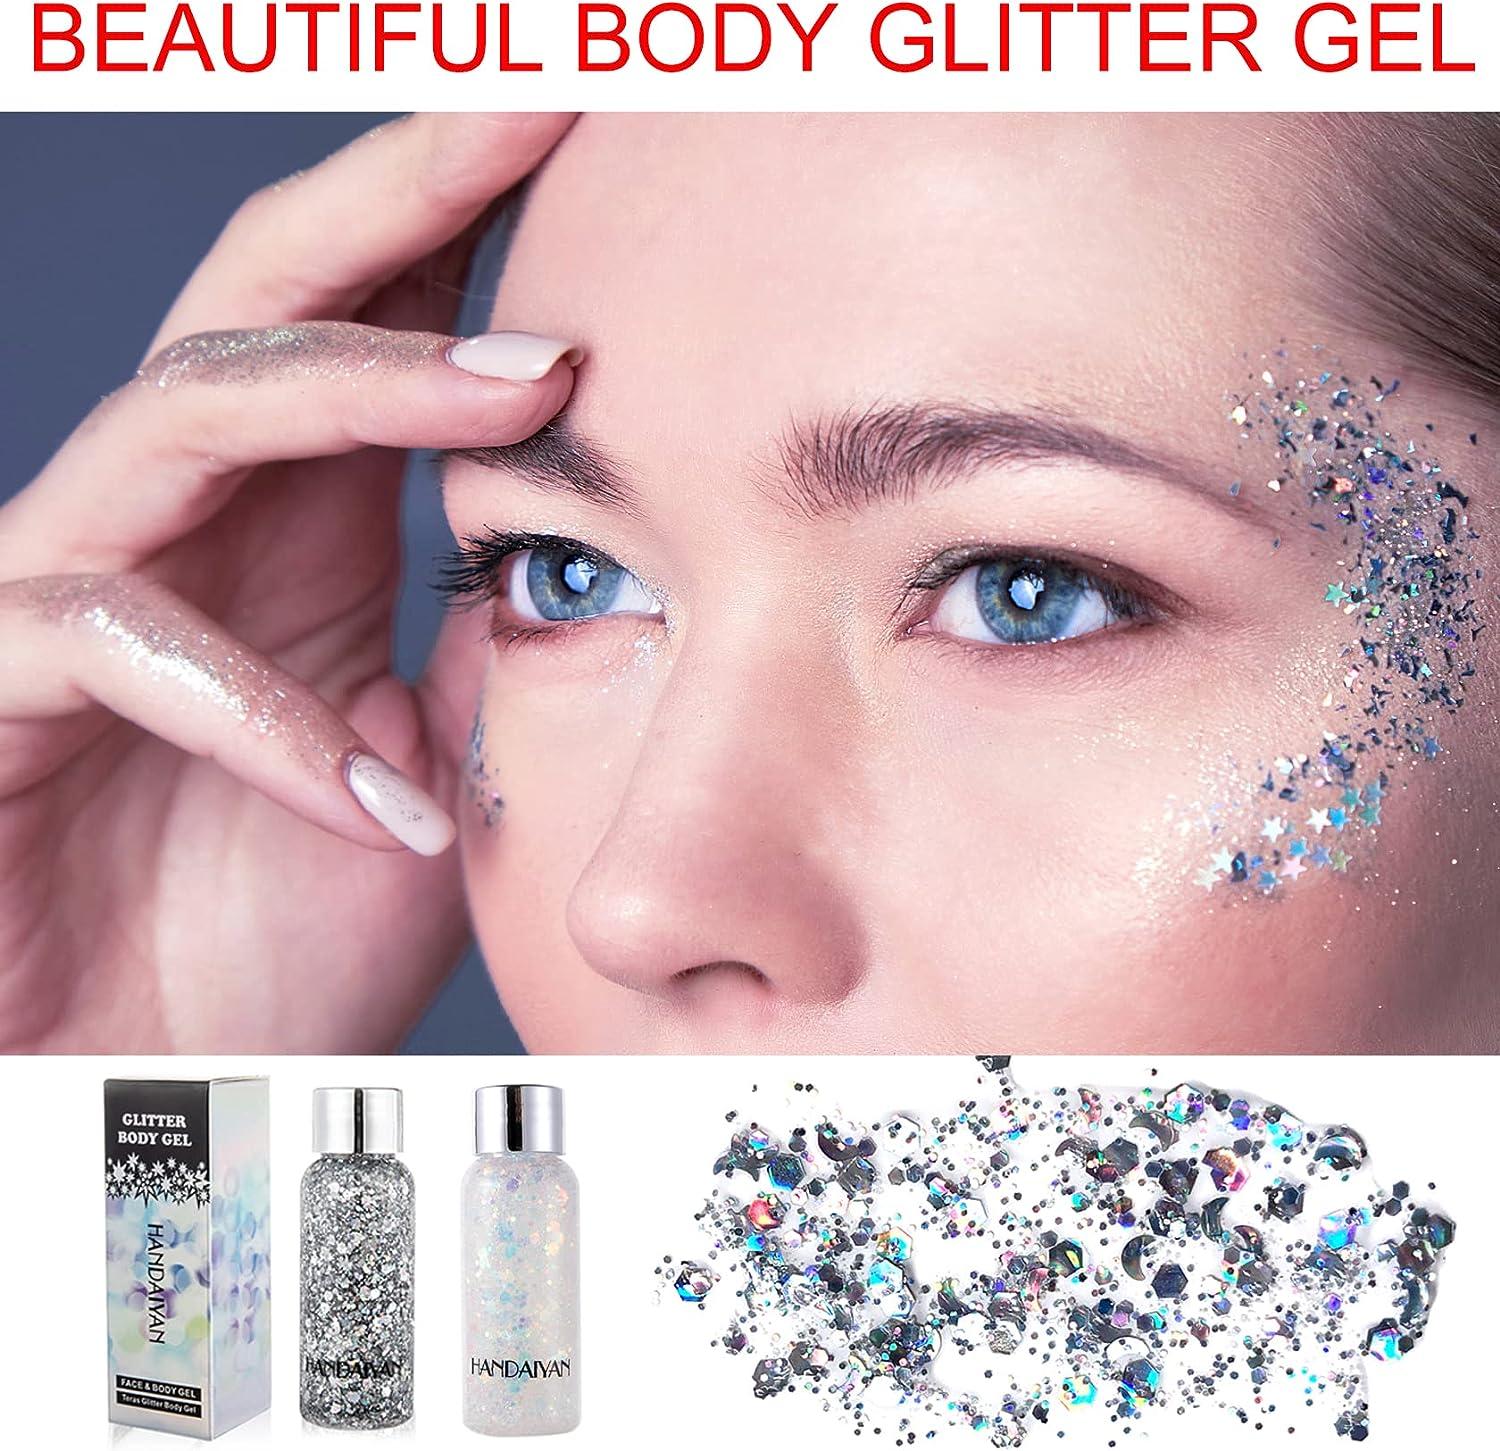 Glitter Spray For Halloween Party, Brighten Skin, Clothes And Add